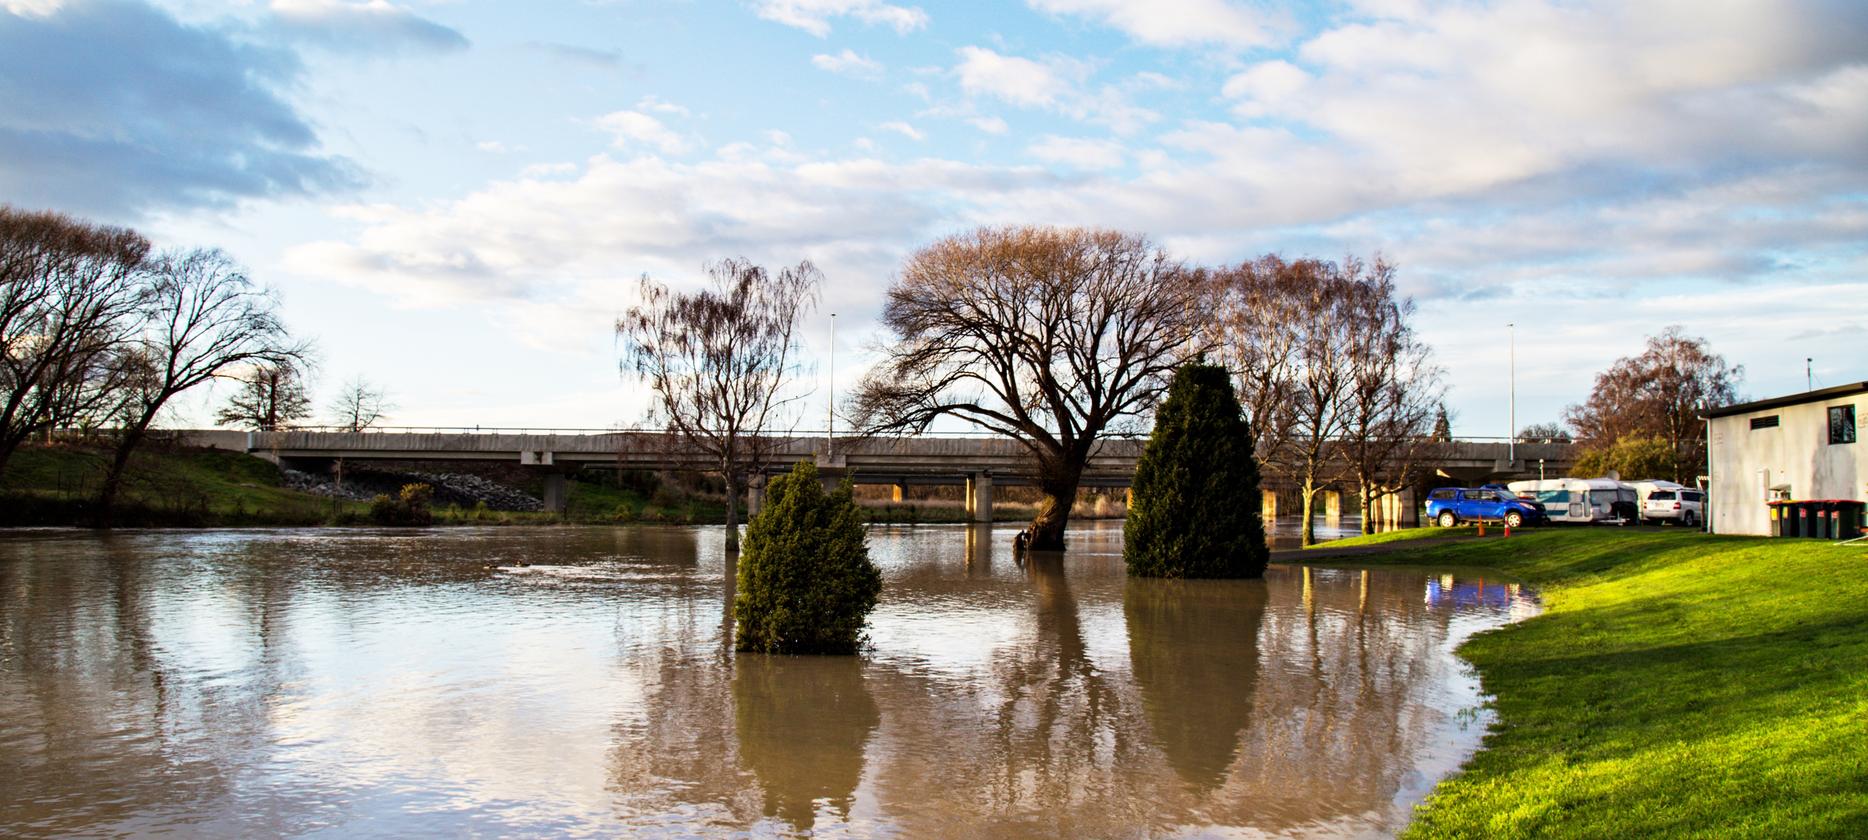 New climate risk analysis shows $100M average annual cost of river flooding to residential buildings